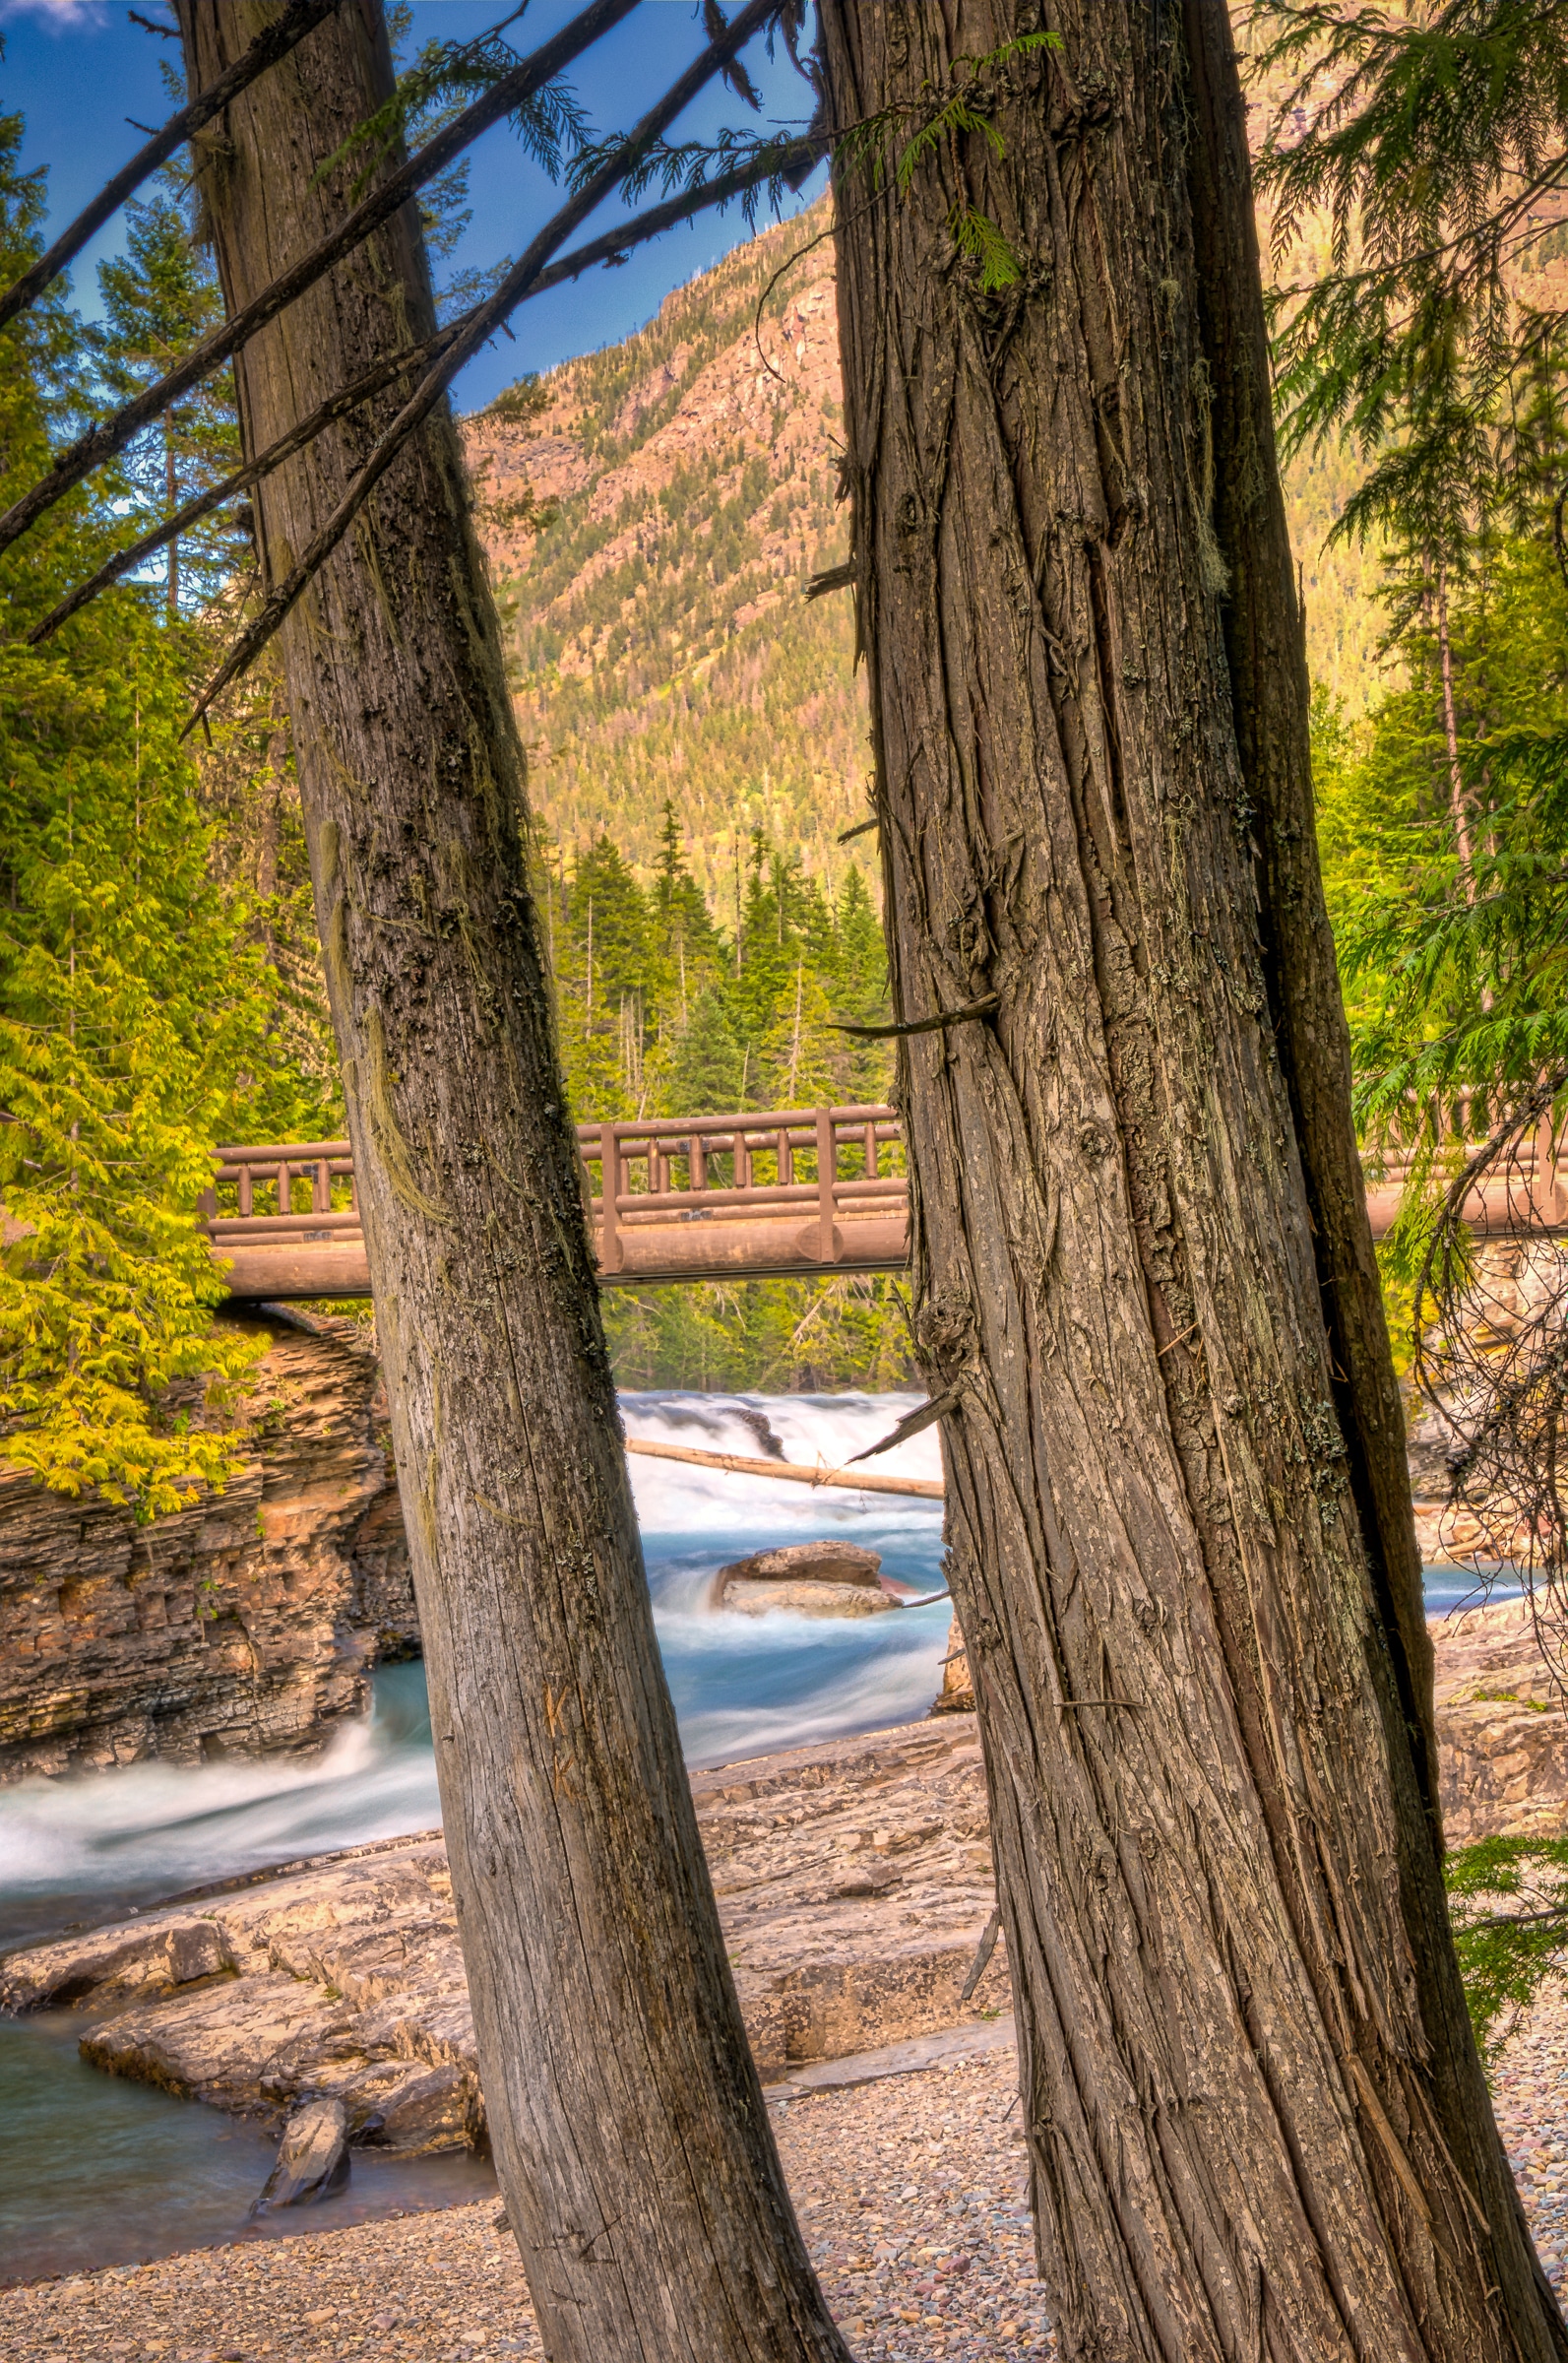 Two trees frame a log footbridge that crosses the river between Sacred Dancing Cascades and McDonald Falls, along Going to the Sun Road in Glacier National Park, Montana.